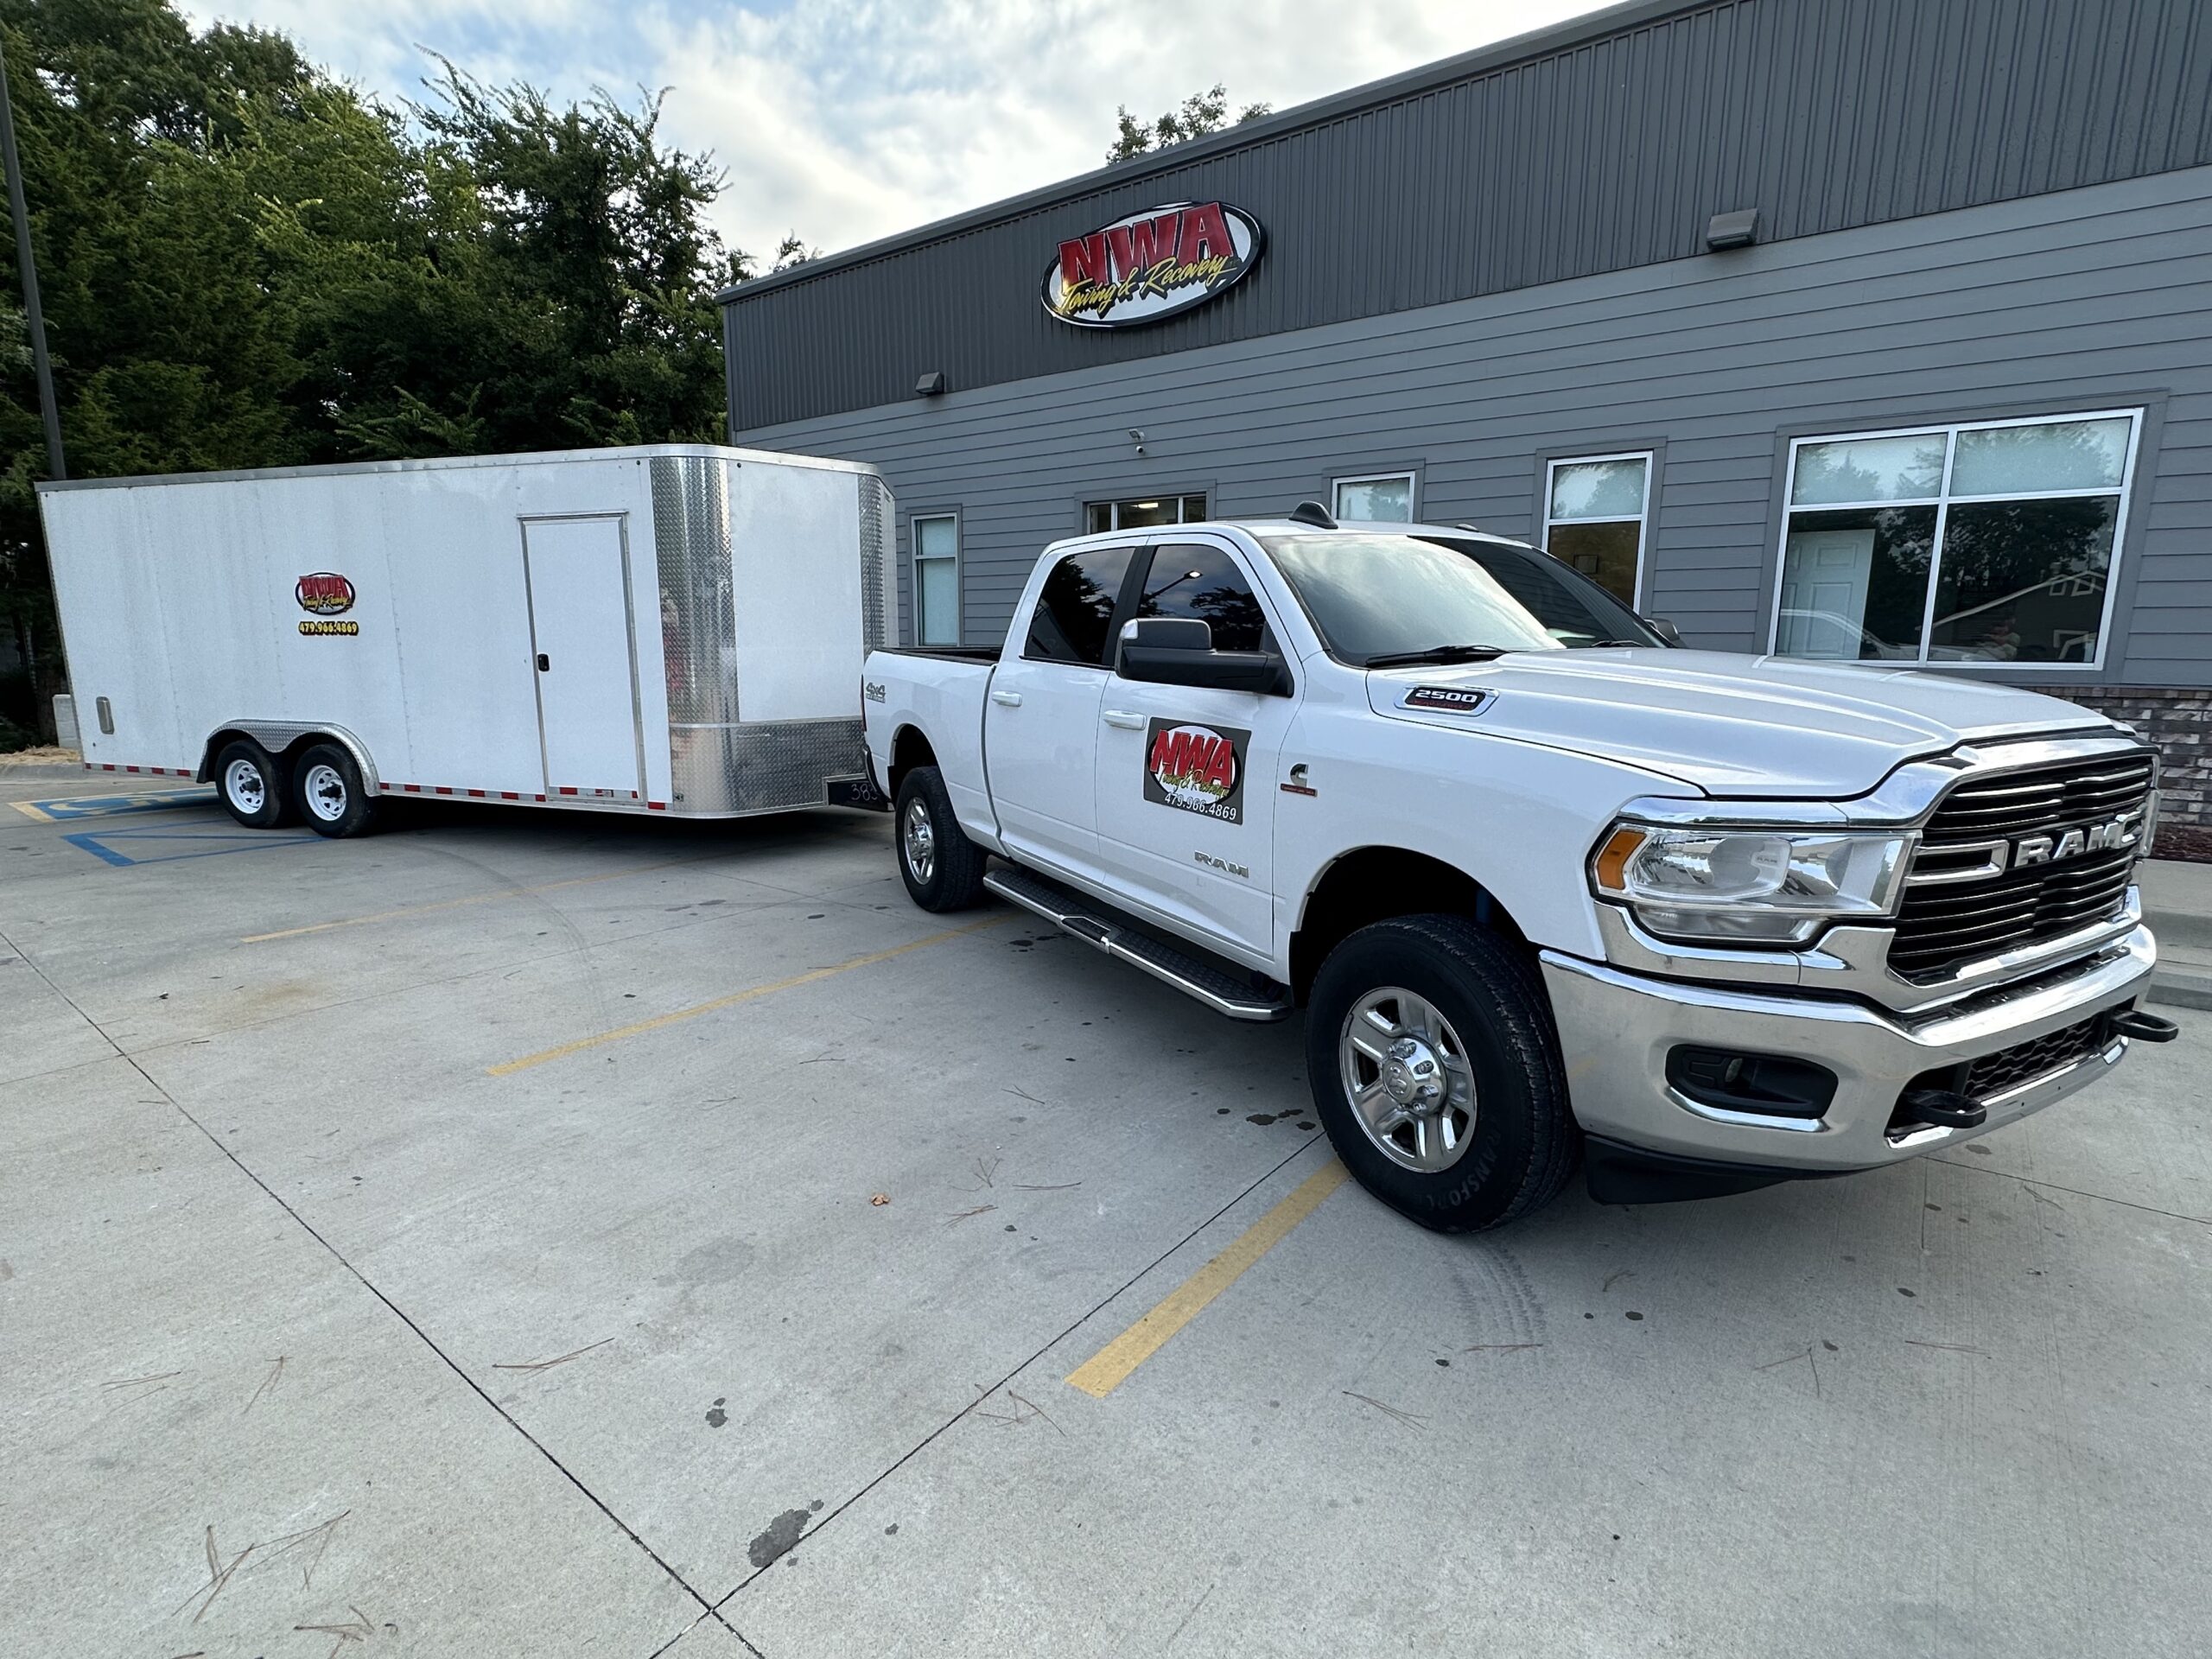 Explore how NWA Tow's specialized Motorcycle Towing services provide safe and reliable transport for your prized motorcycles in Northwest Arkansas.